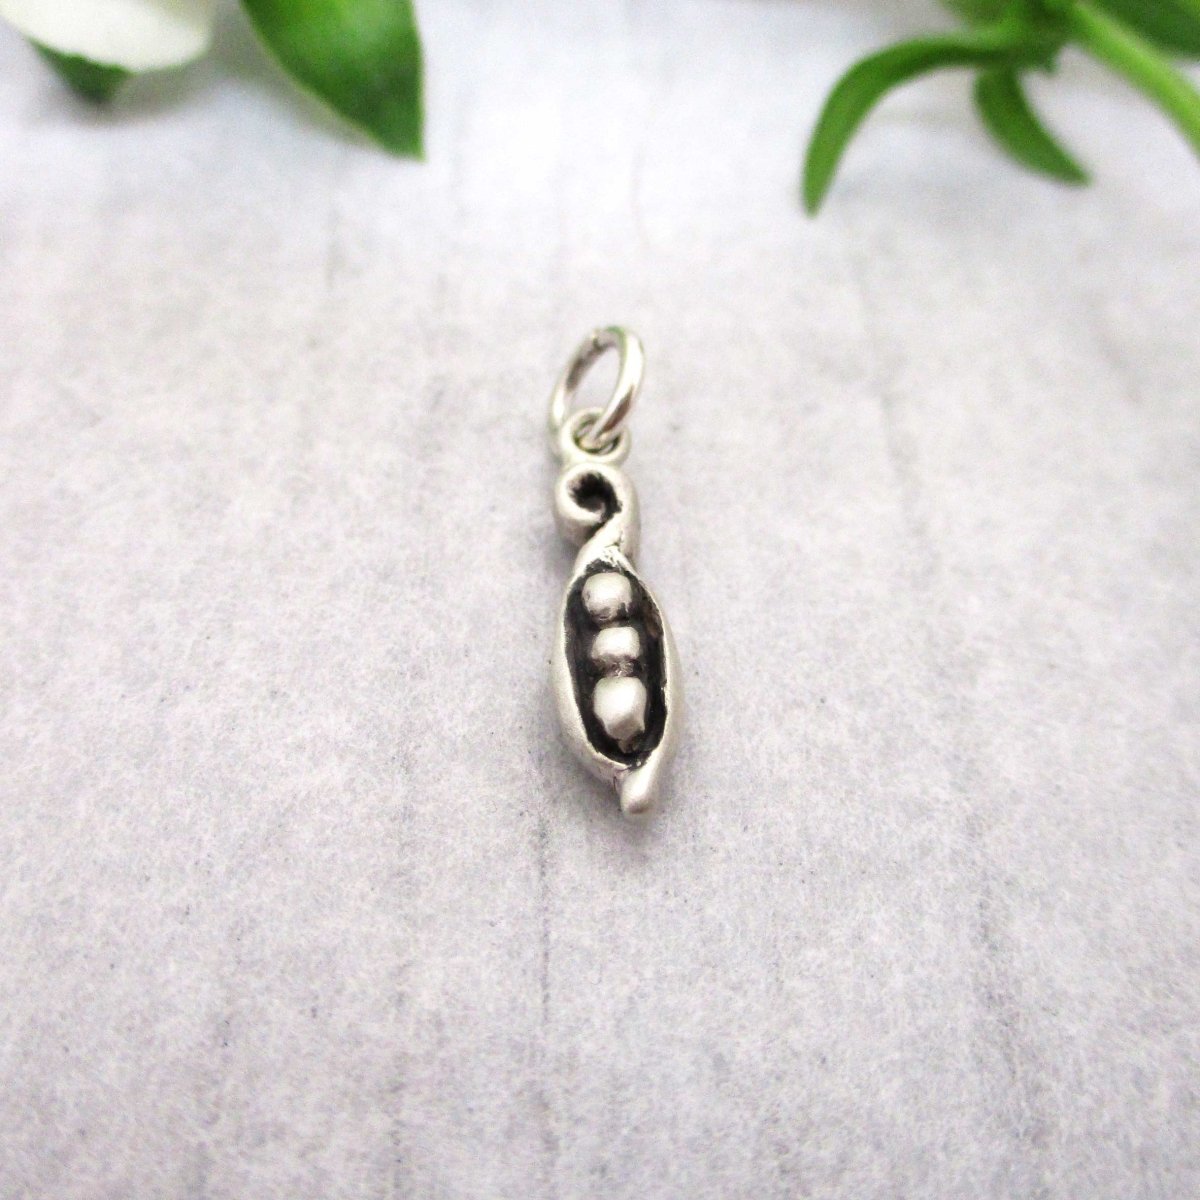 Sweet Pea, Peas in a Pod Charm in Sterling Silver - Luxe Design Jewellery